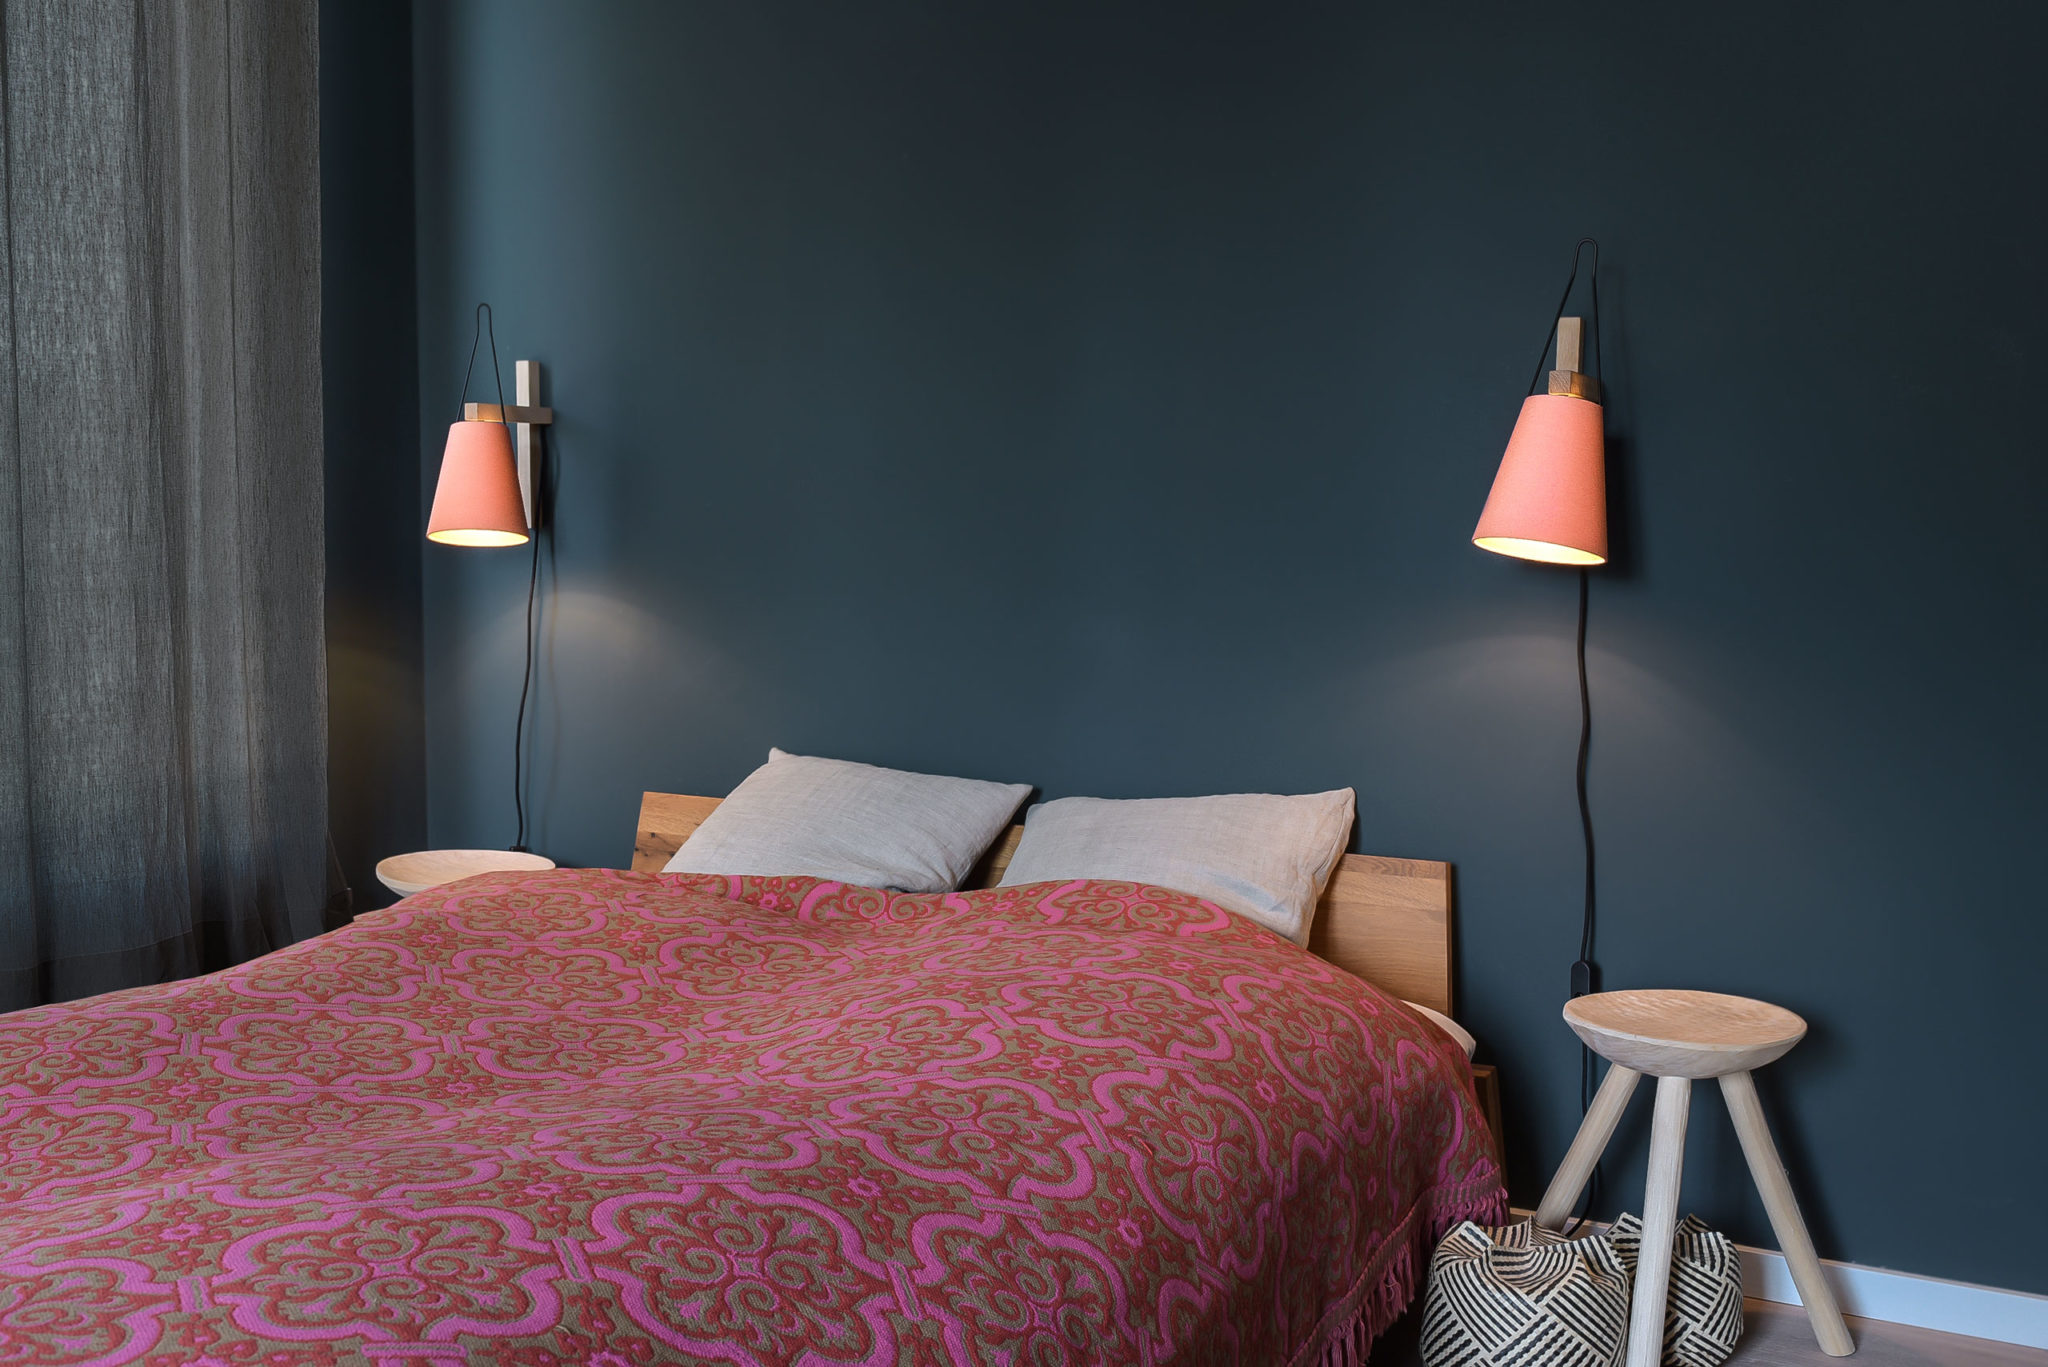 A pair of MINA wall lamps in Chintz Flamingo next to the bed.